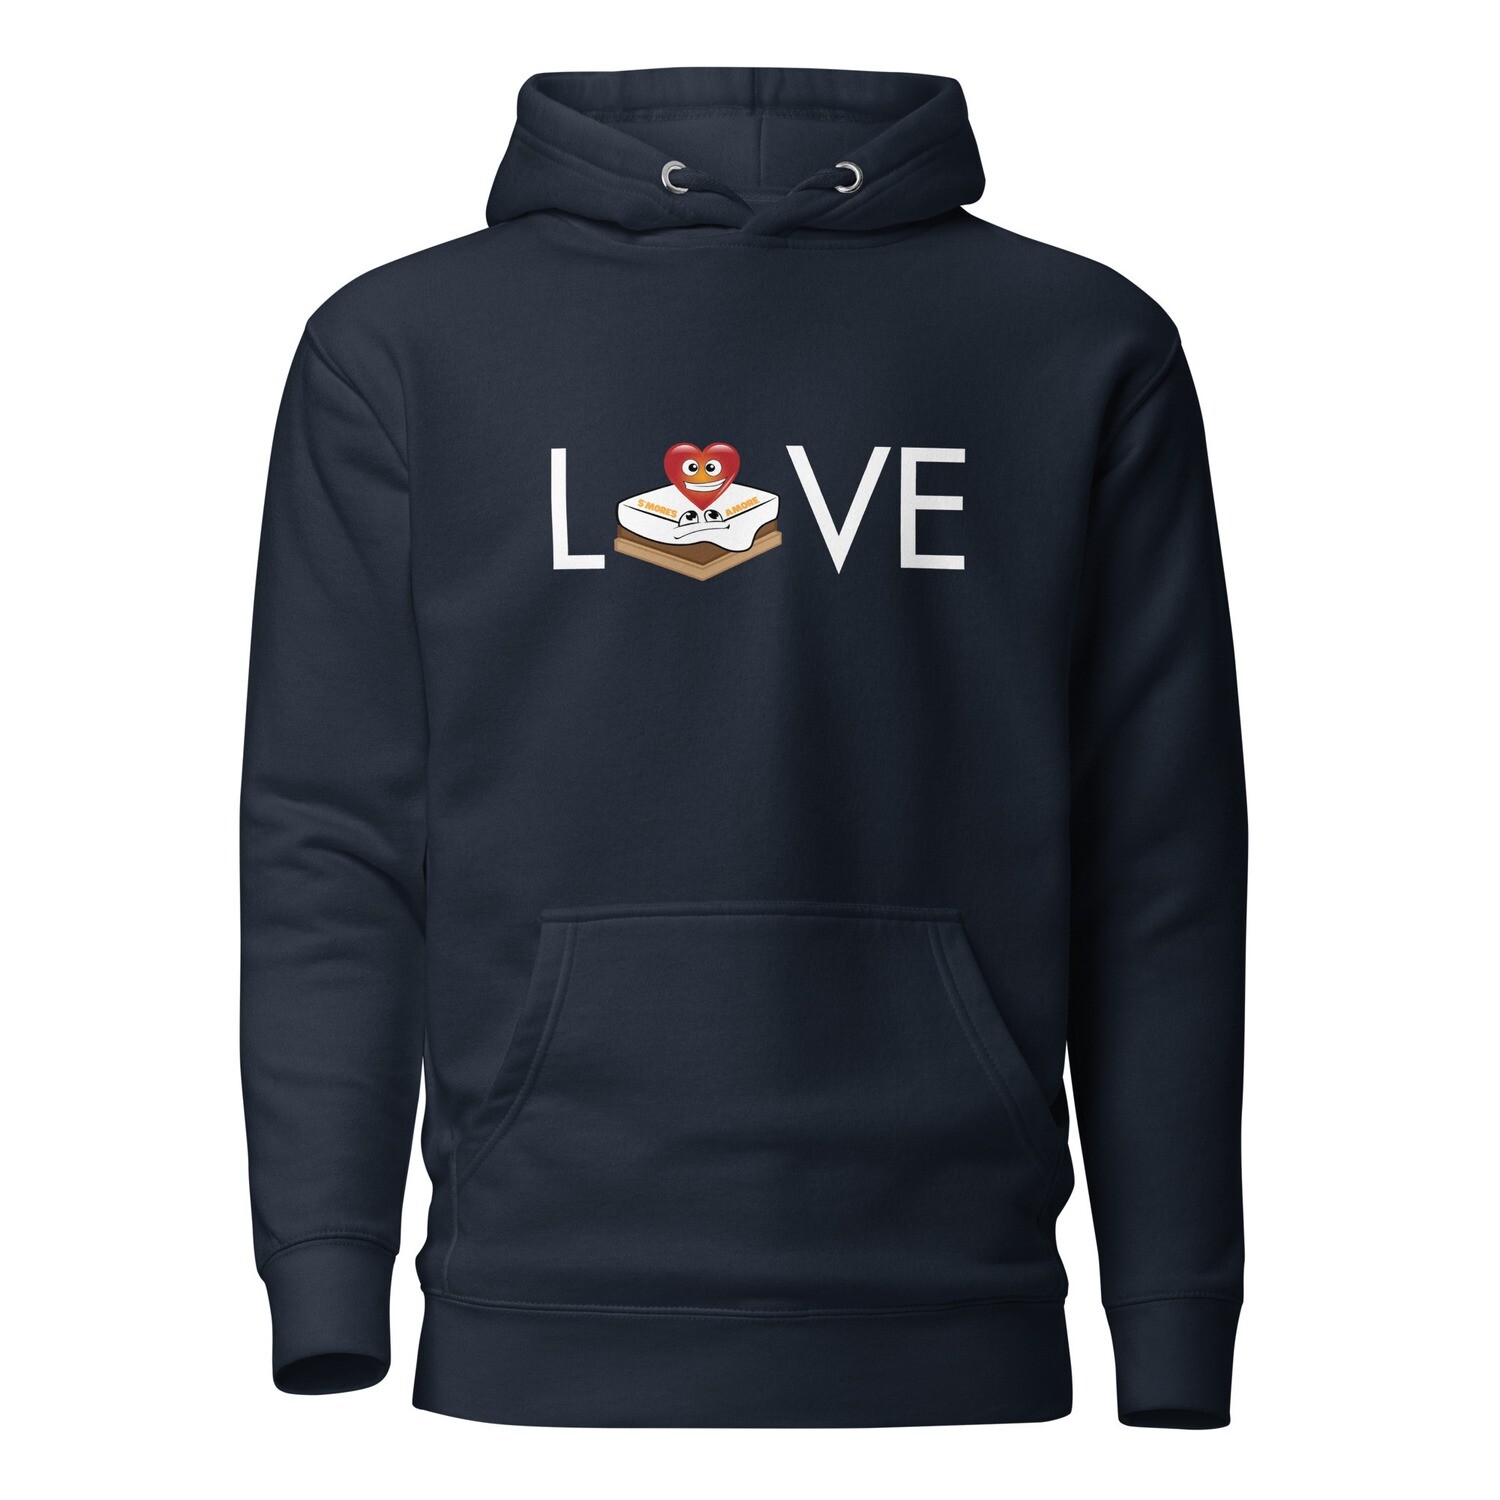 S'mores Amore "LOVE" Hoodie (Navy)